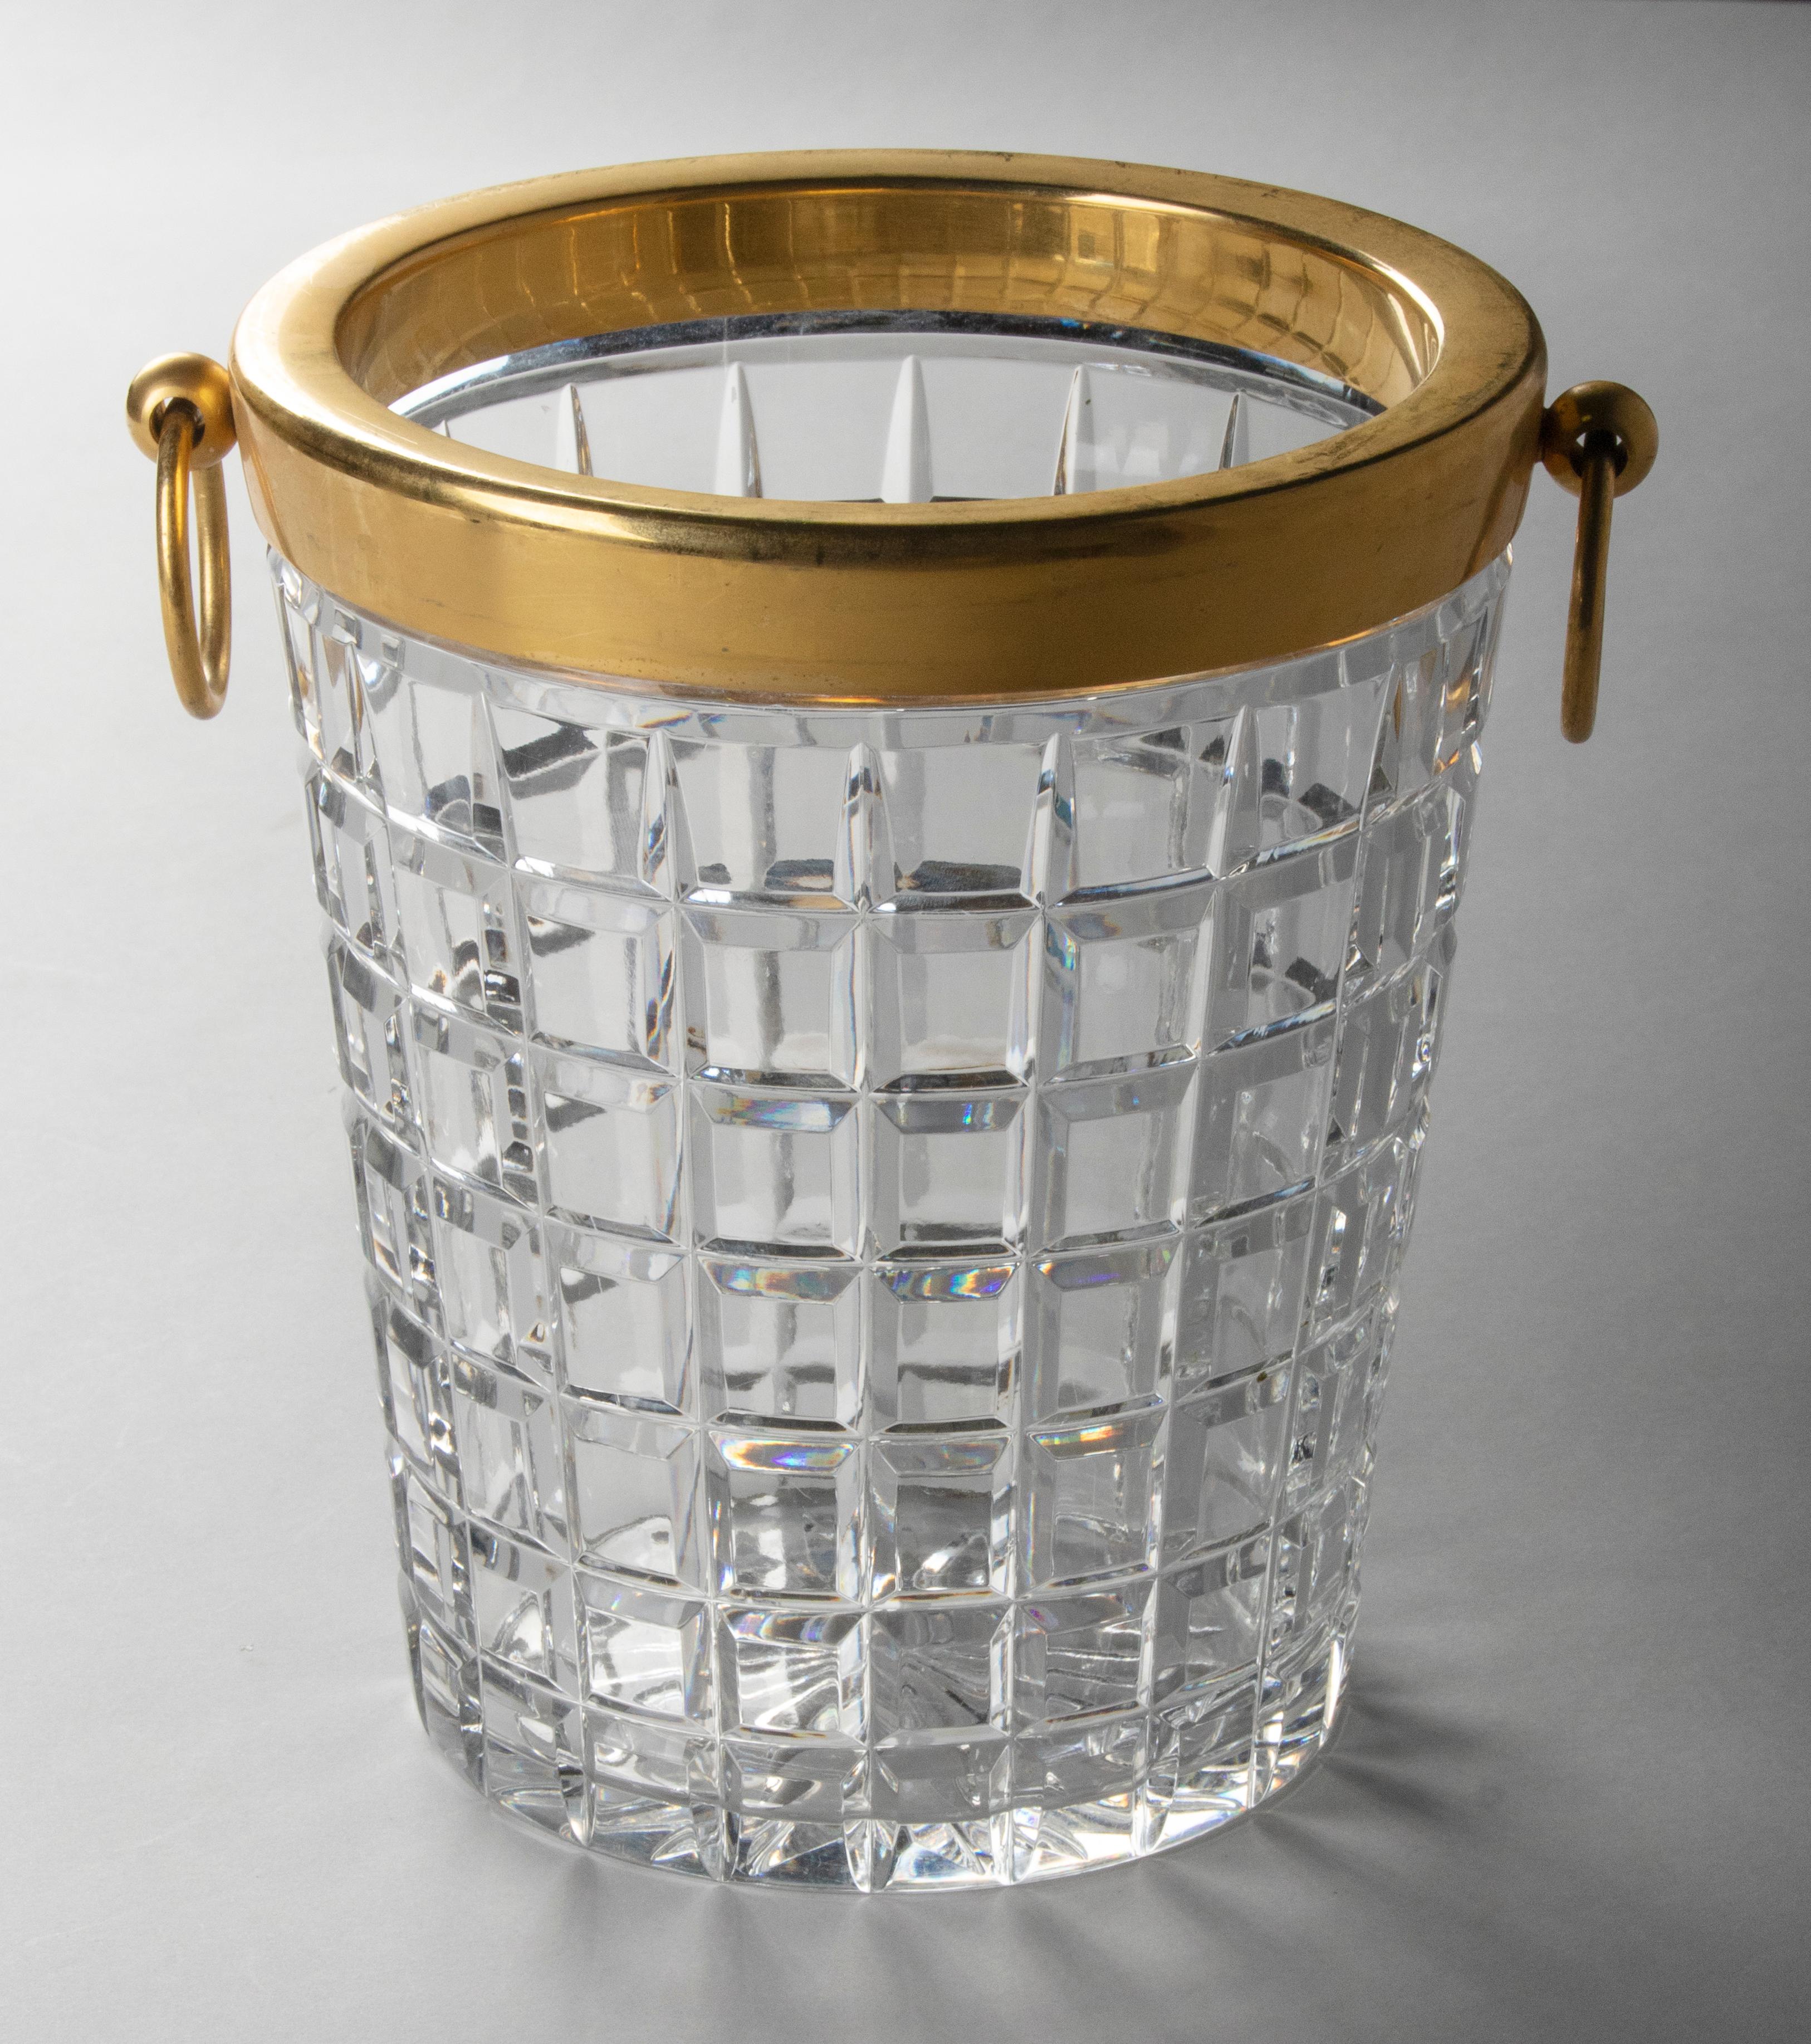 Beautiful large champagne cooler with gold-coloured copper rim. The crystal is of a good, heavy quality and has a nice deep cut in square shapes. The cooler is not marked, but it is presumably made by the Belgian maker Val Saint Lambert. The cooler